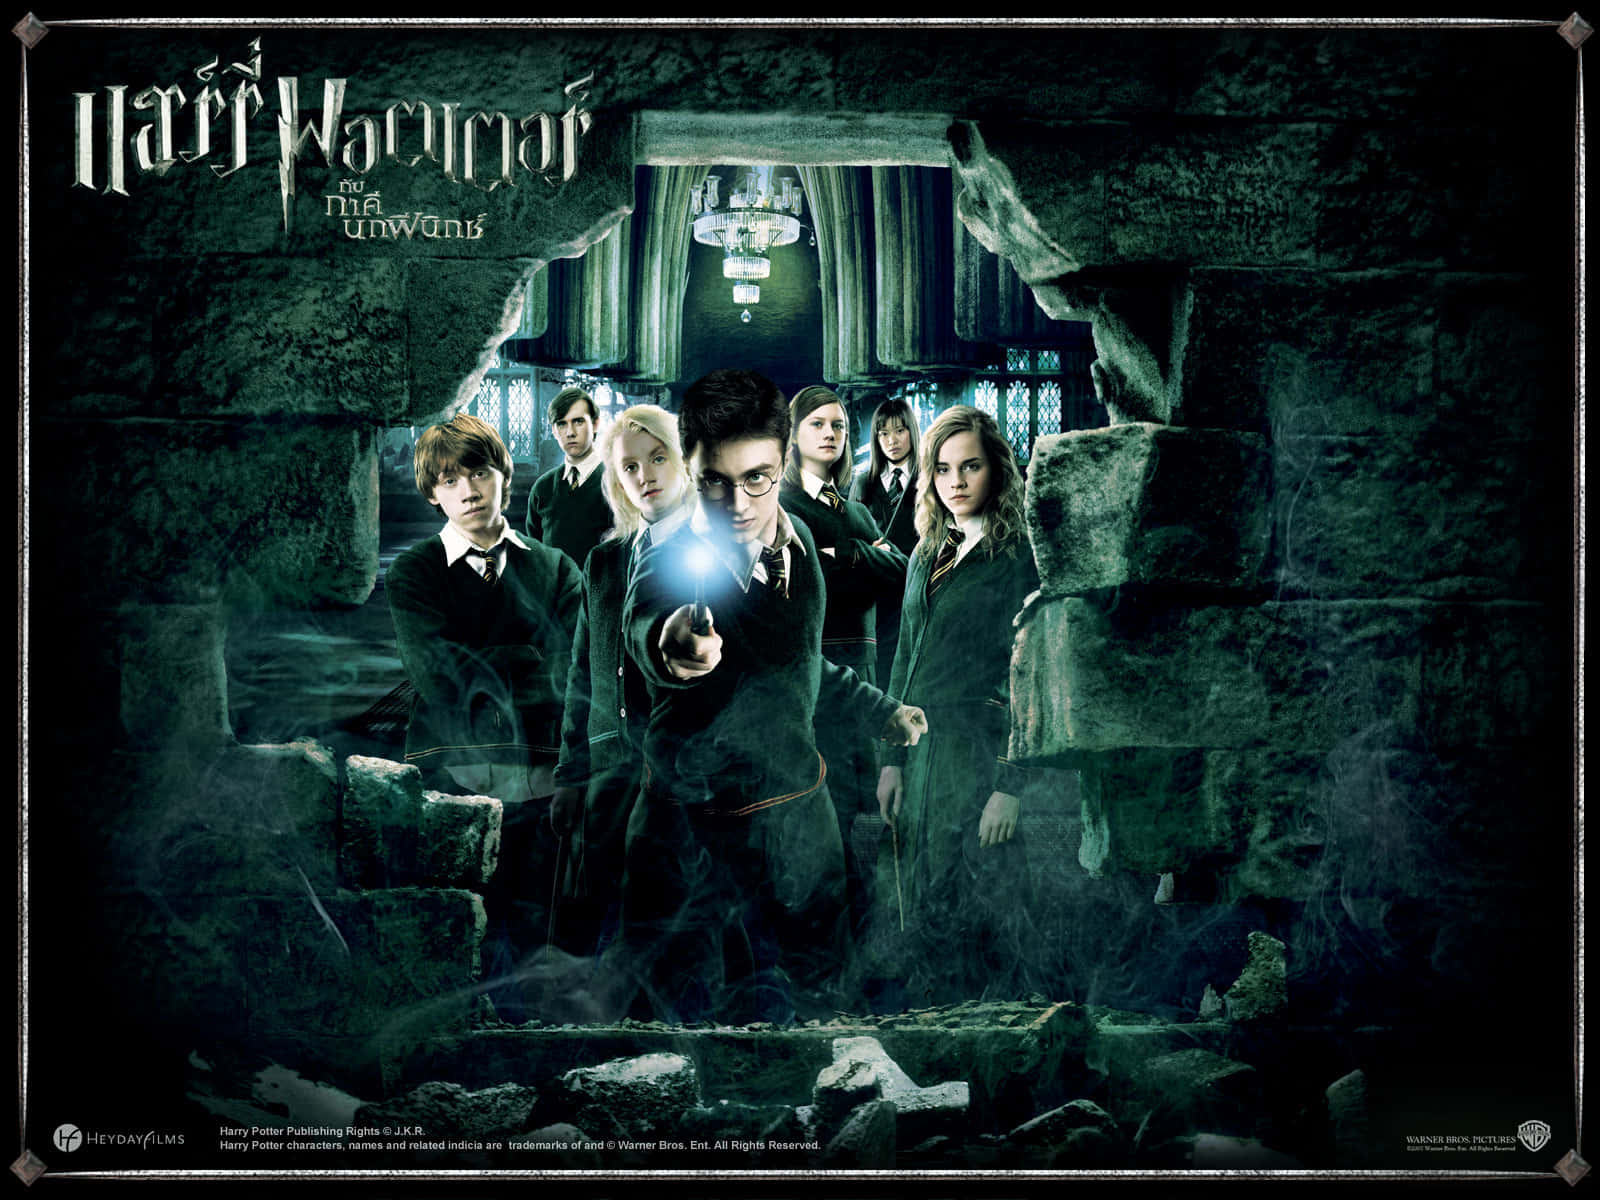 Dumbledore's Army with Harry, Hermione, and Ron preparing for a crucial battle. Wallpaper